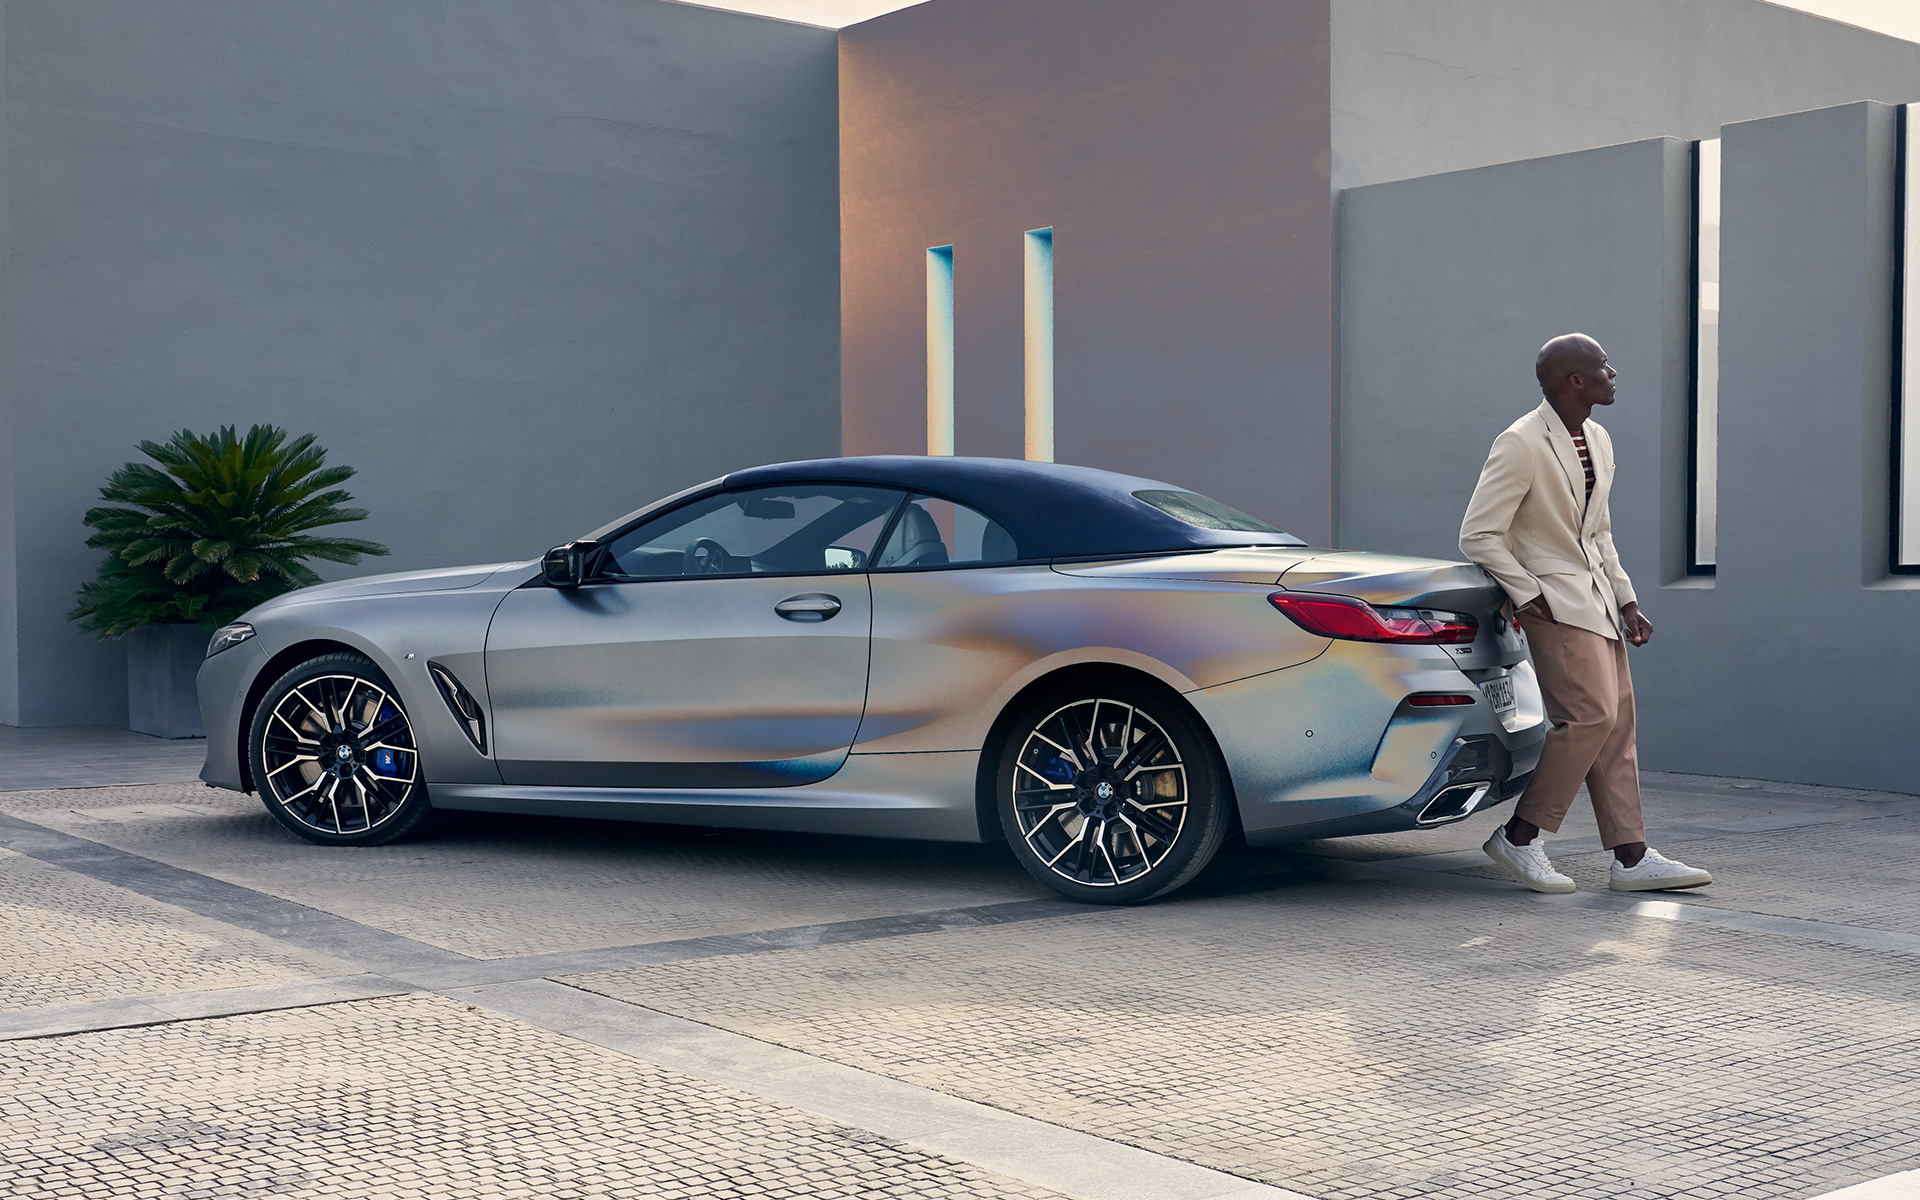 BMW M850i xDrive Convertible G14 LCI Facelift 2022 BMW Individual Frozen Pure Grey metallic three-quarter rear view with male model leaning against vehicle